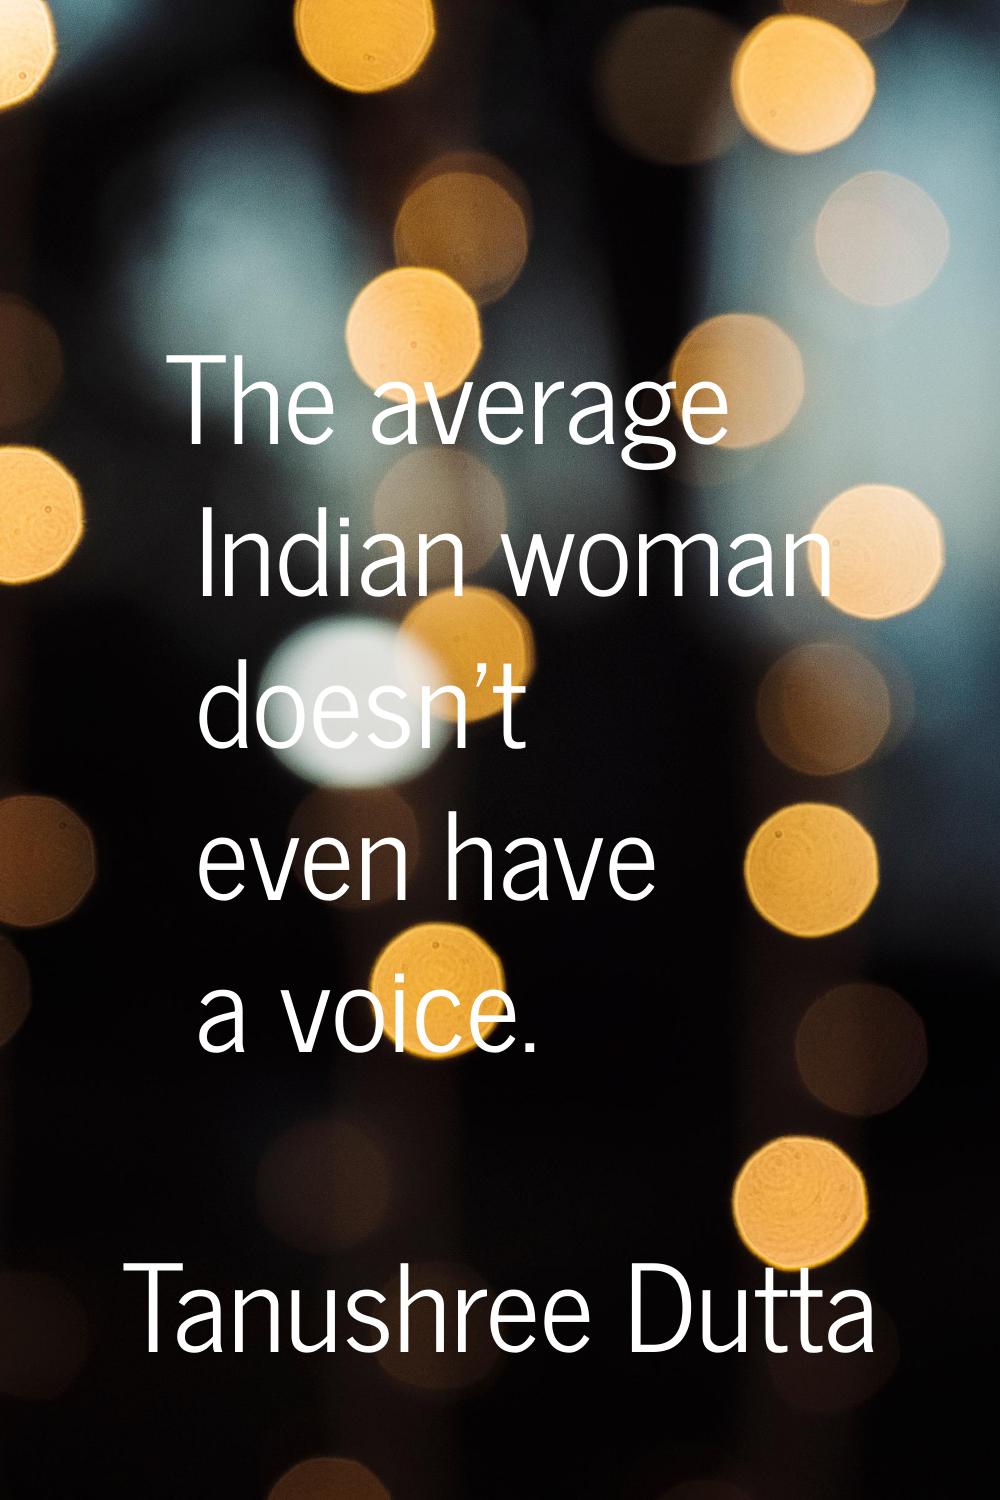 The average Indian woman doesn't even have a voice.